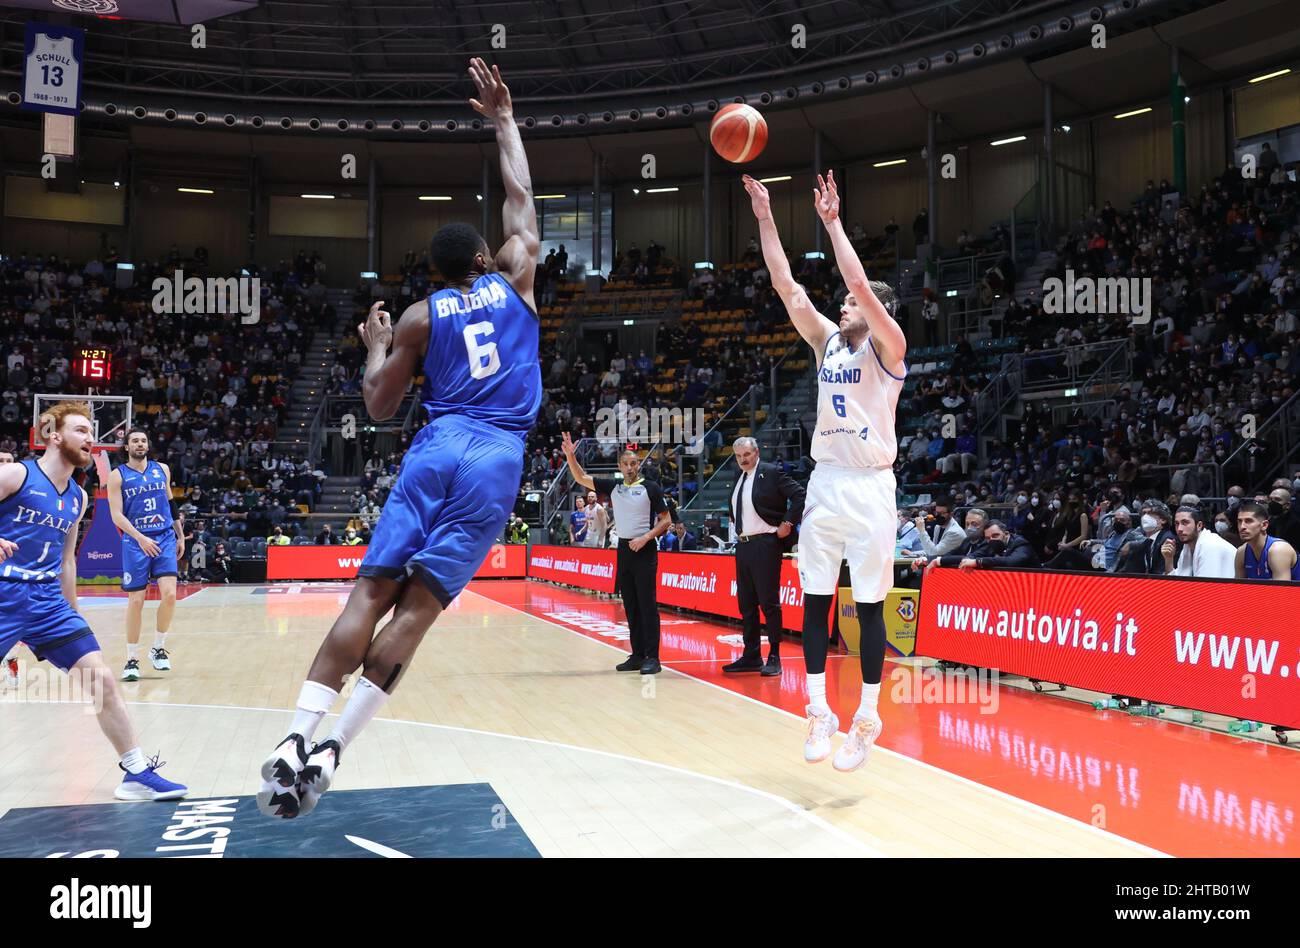 Jon Axel Gudmundsson (Iceland) during the FIBA World Cup 2023 qualifiers game Italy Vs. Iceland at the Paladozza sports palace in Bologna, February 27, 2022 - Photo: Michele Nucci Stock Photo